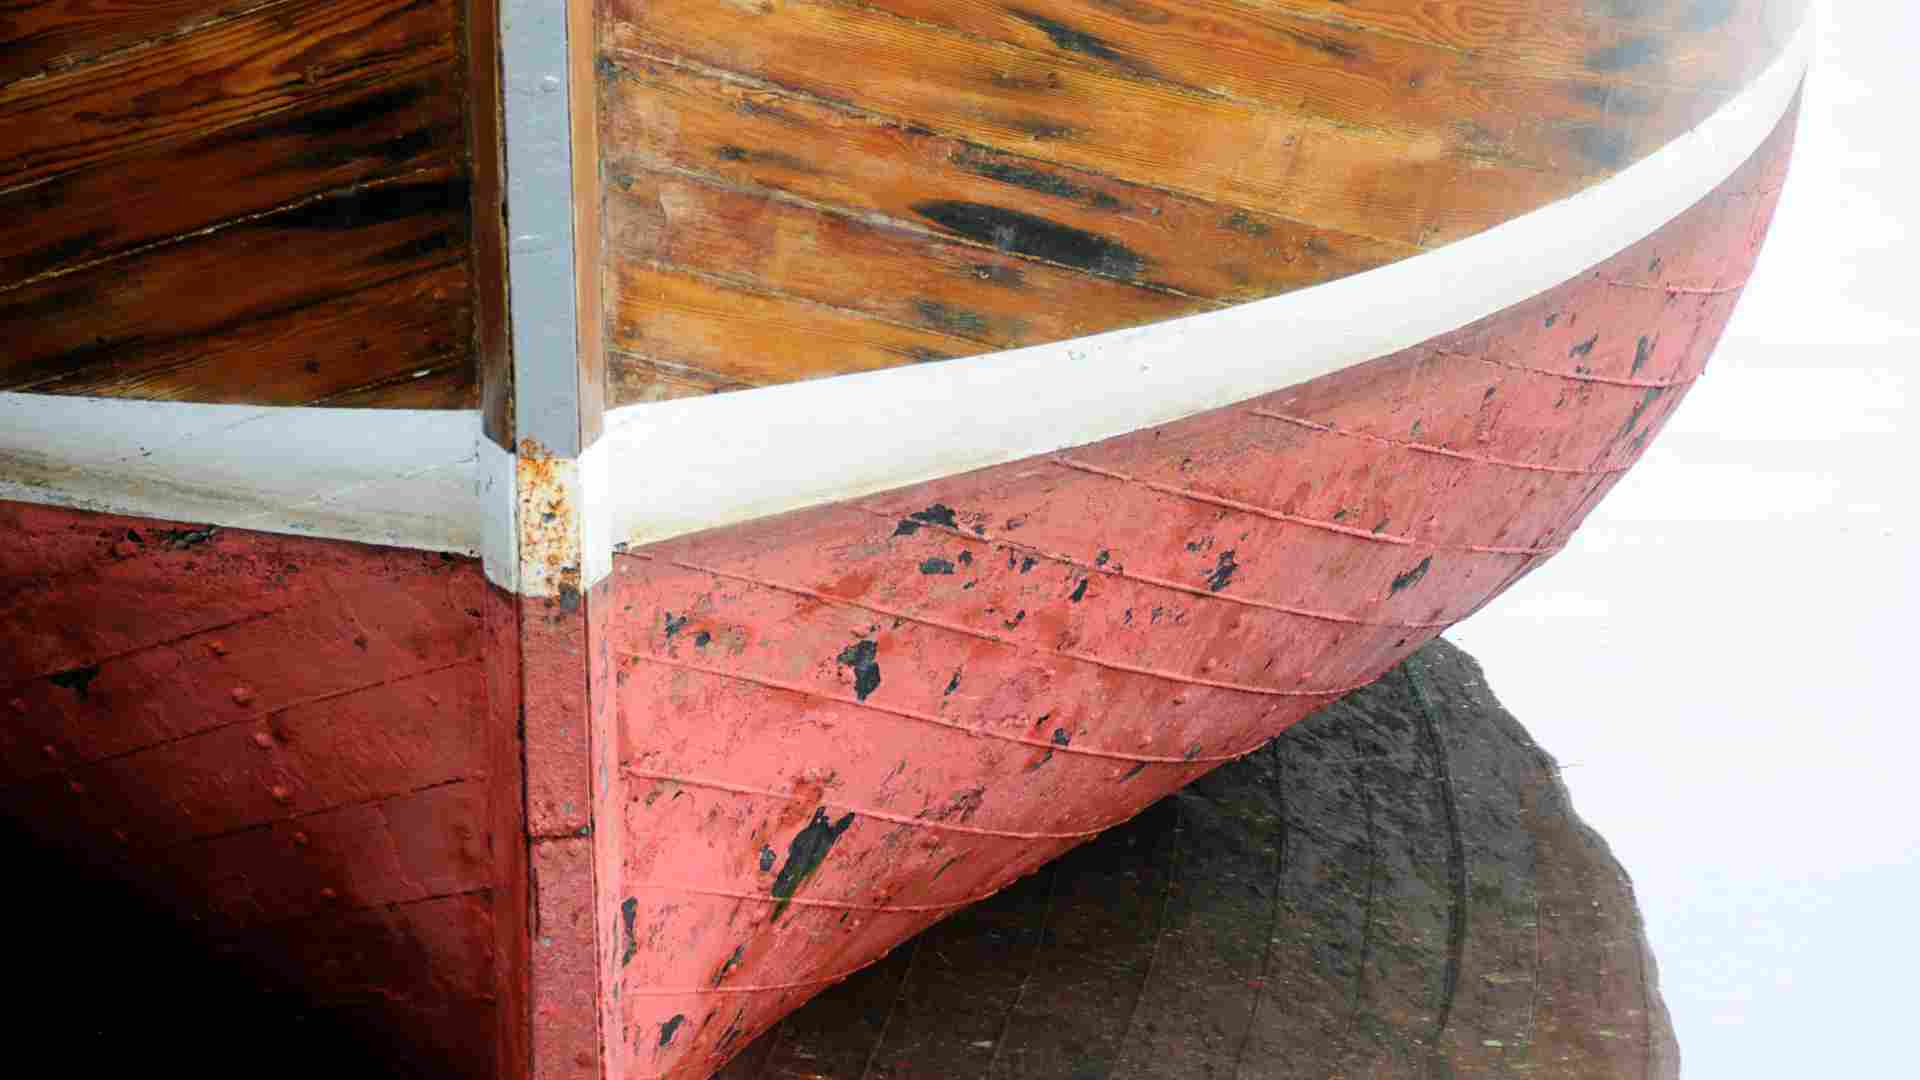 What are the different types of boat hull designs and their advantages